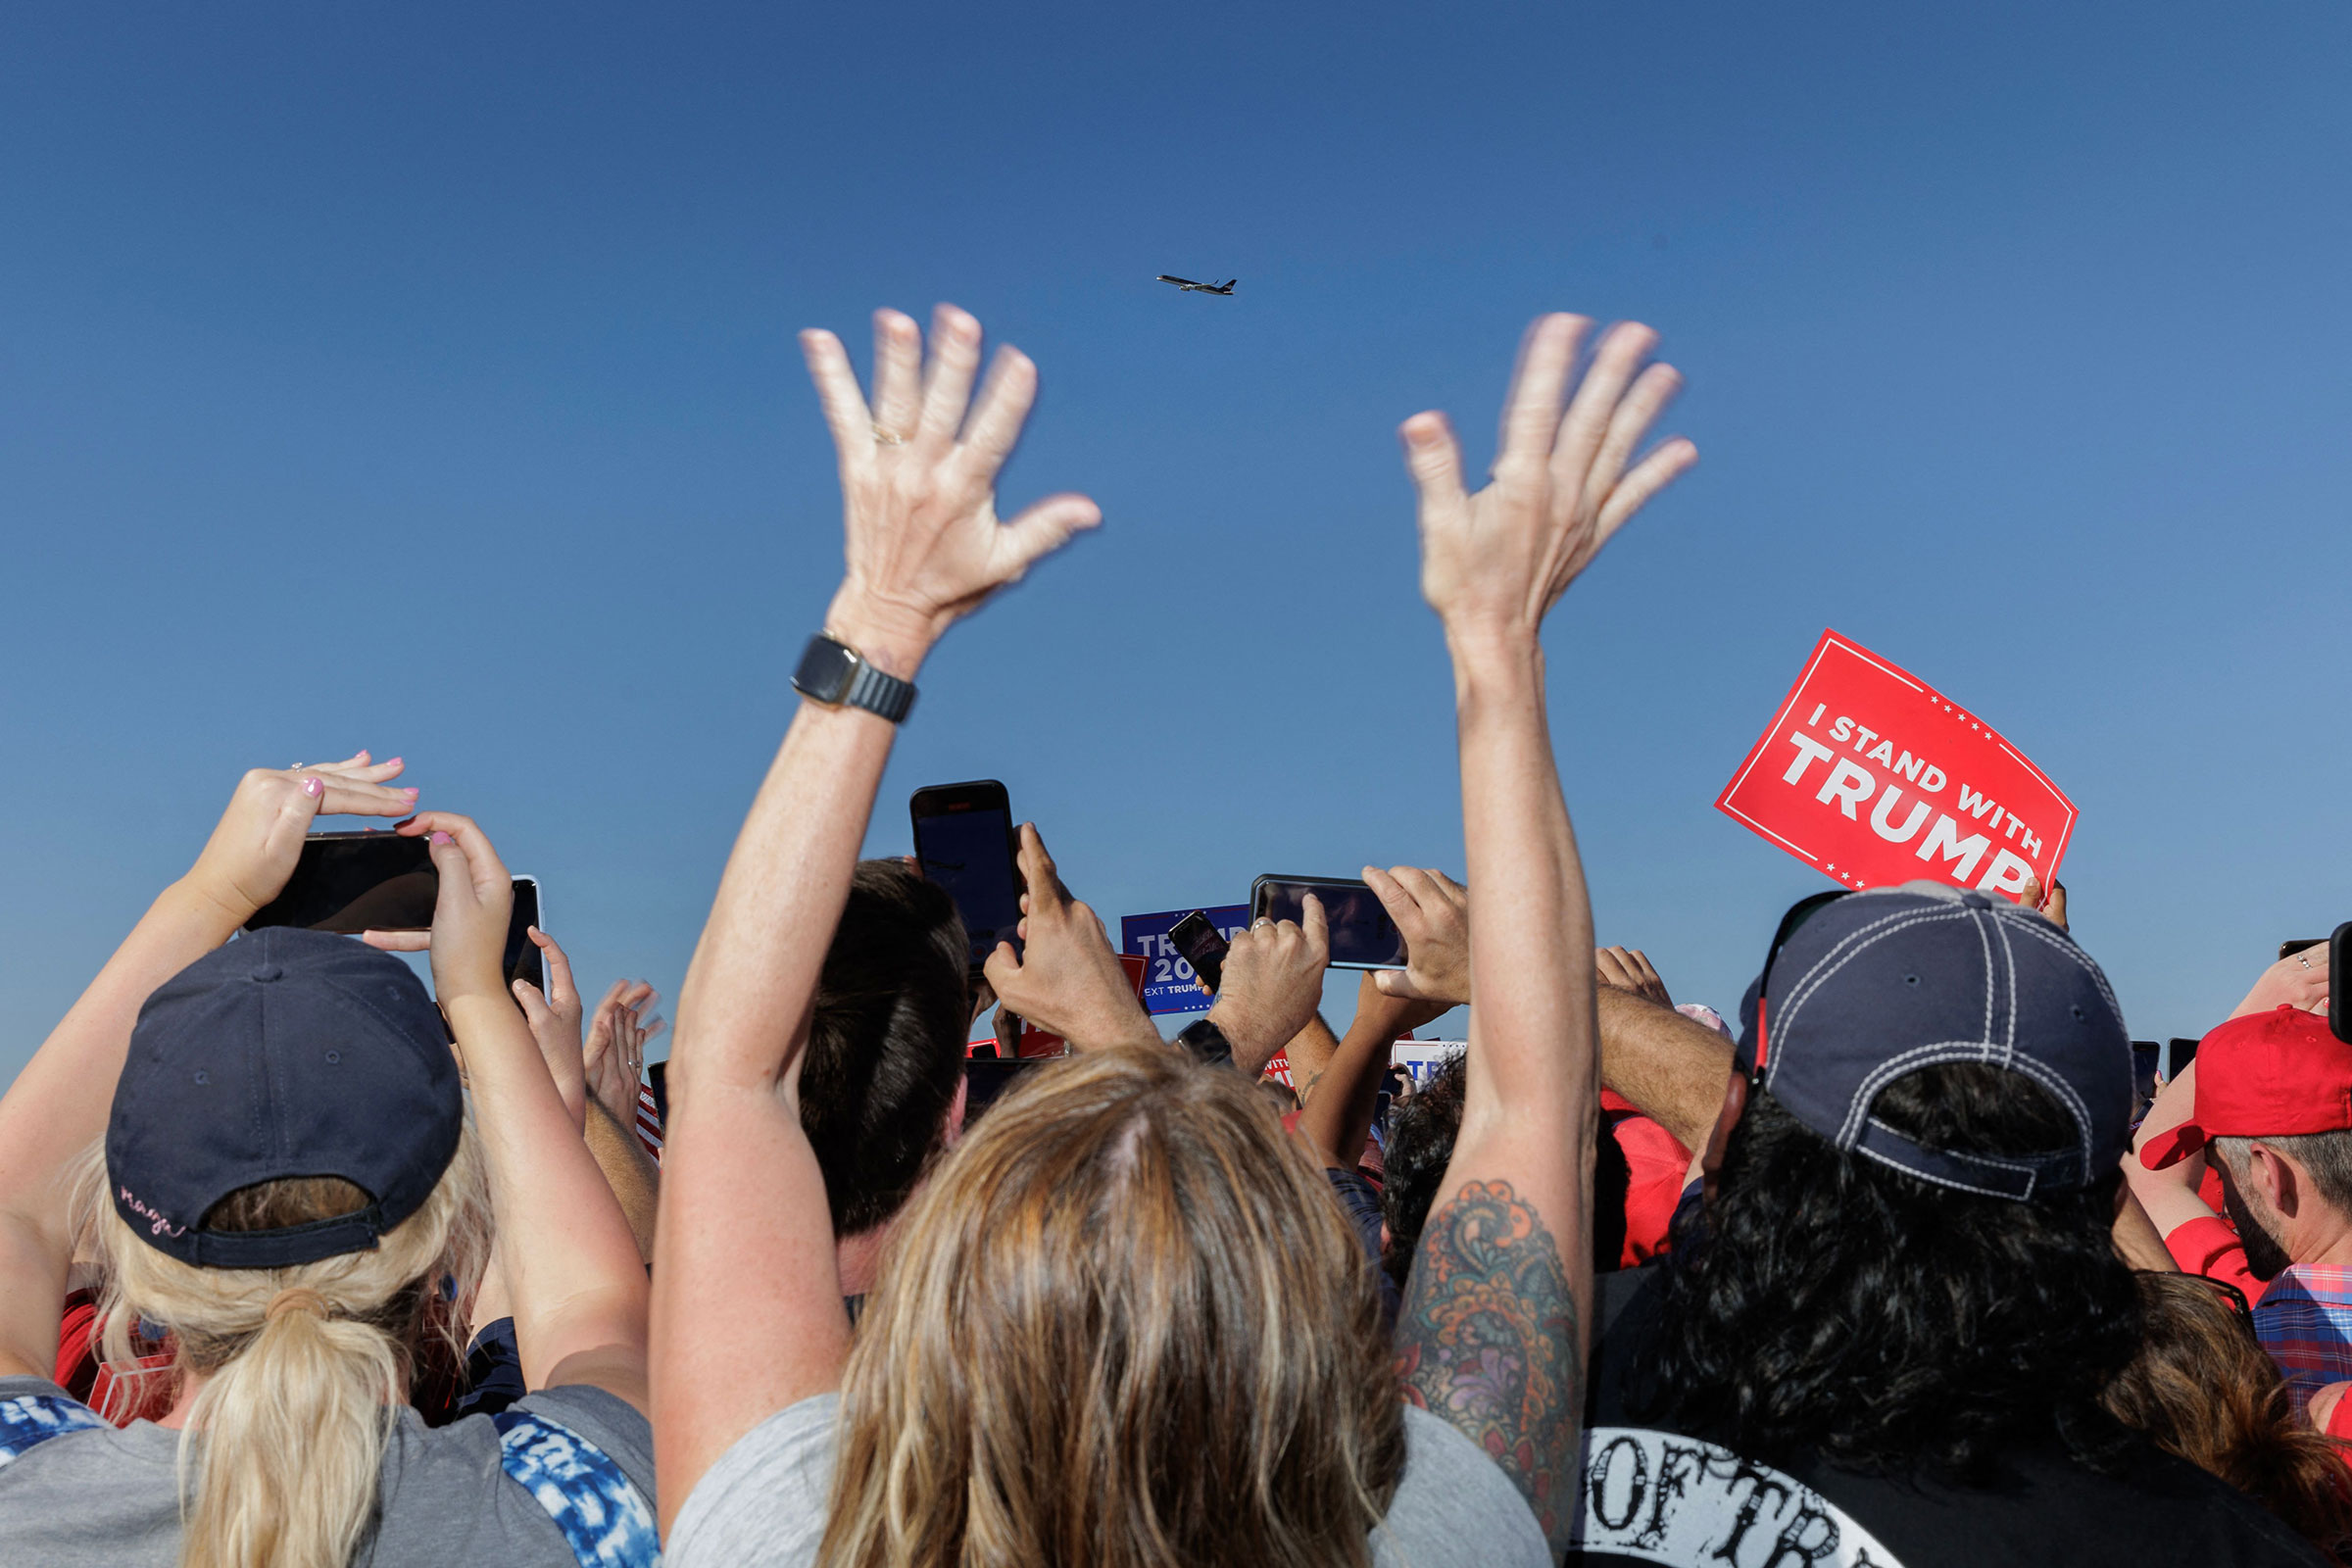 Supporters of former President Donald Trump cheer as his plane flies over the 2024 election campaign rally in Waco, Texas, on March 25, 2023. (Shelby Tauber—AFP/Getty Images)